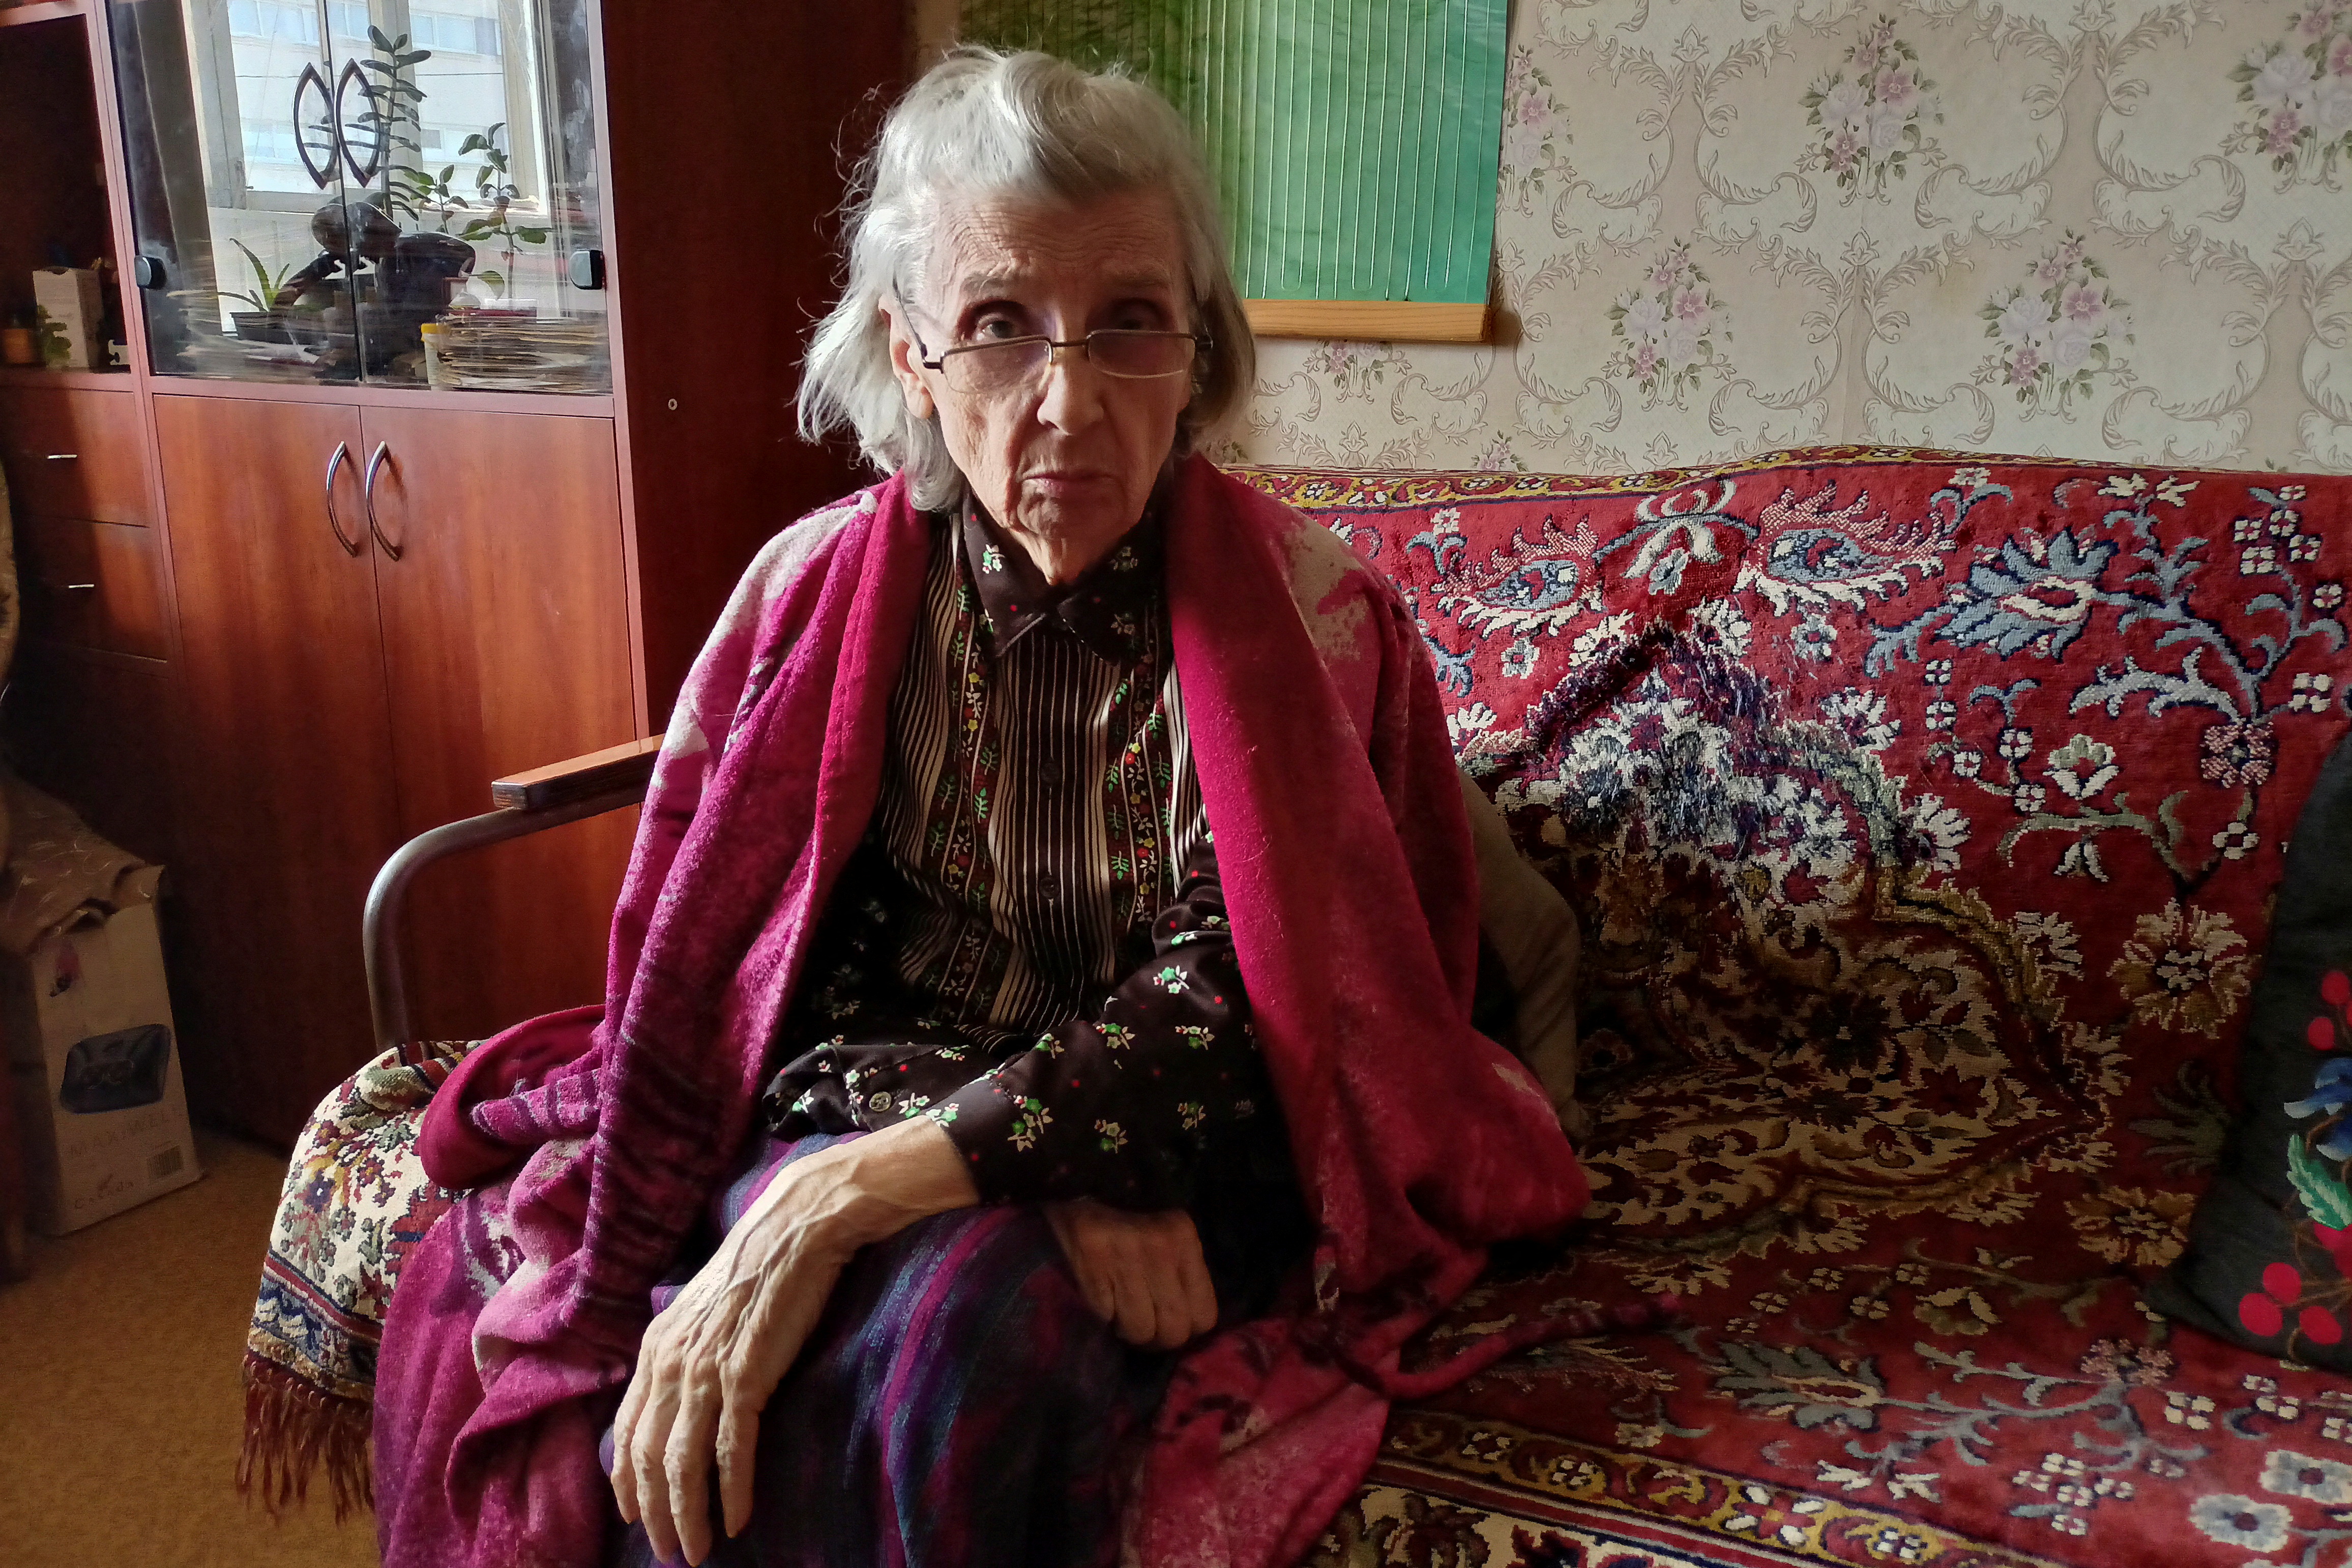 Margarita Morozova, who survived the siege of Leningrad during World War II, poses for a picture at her apartment in Kharkiv